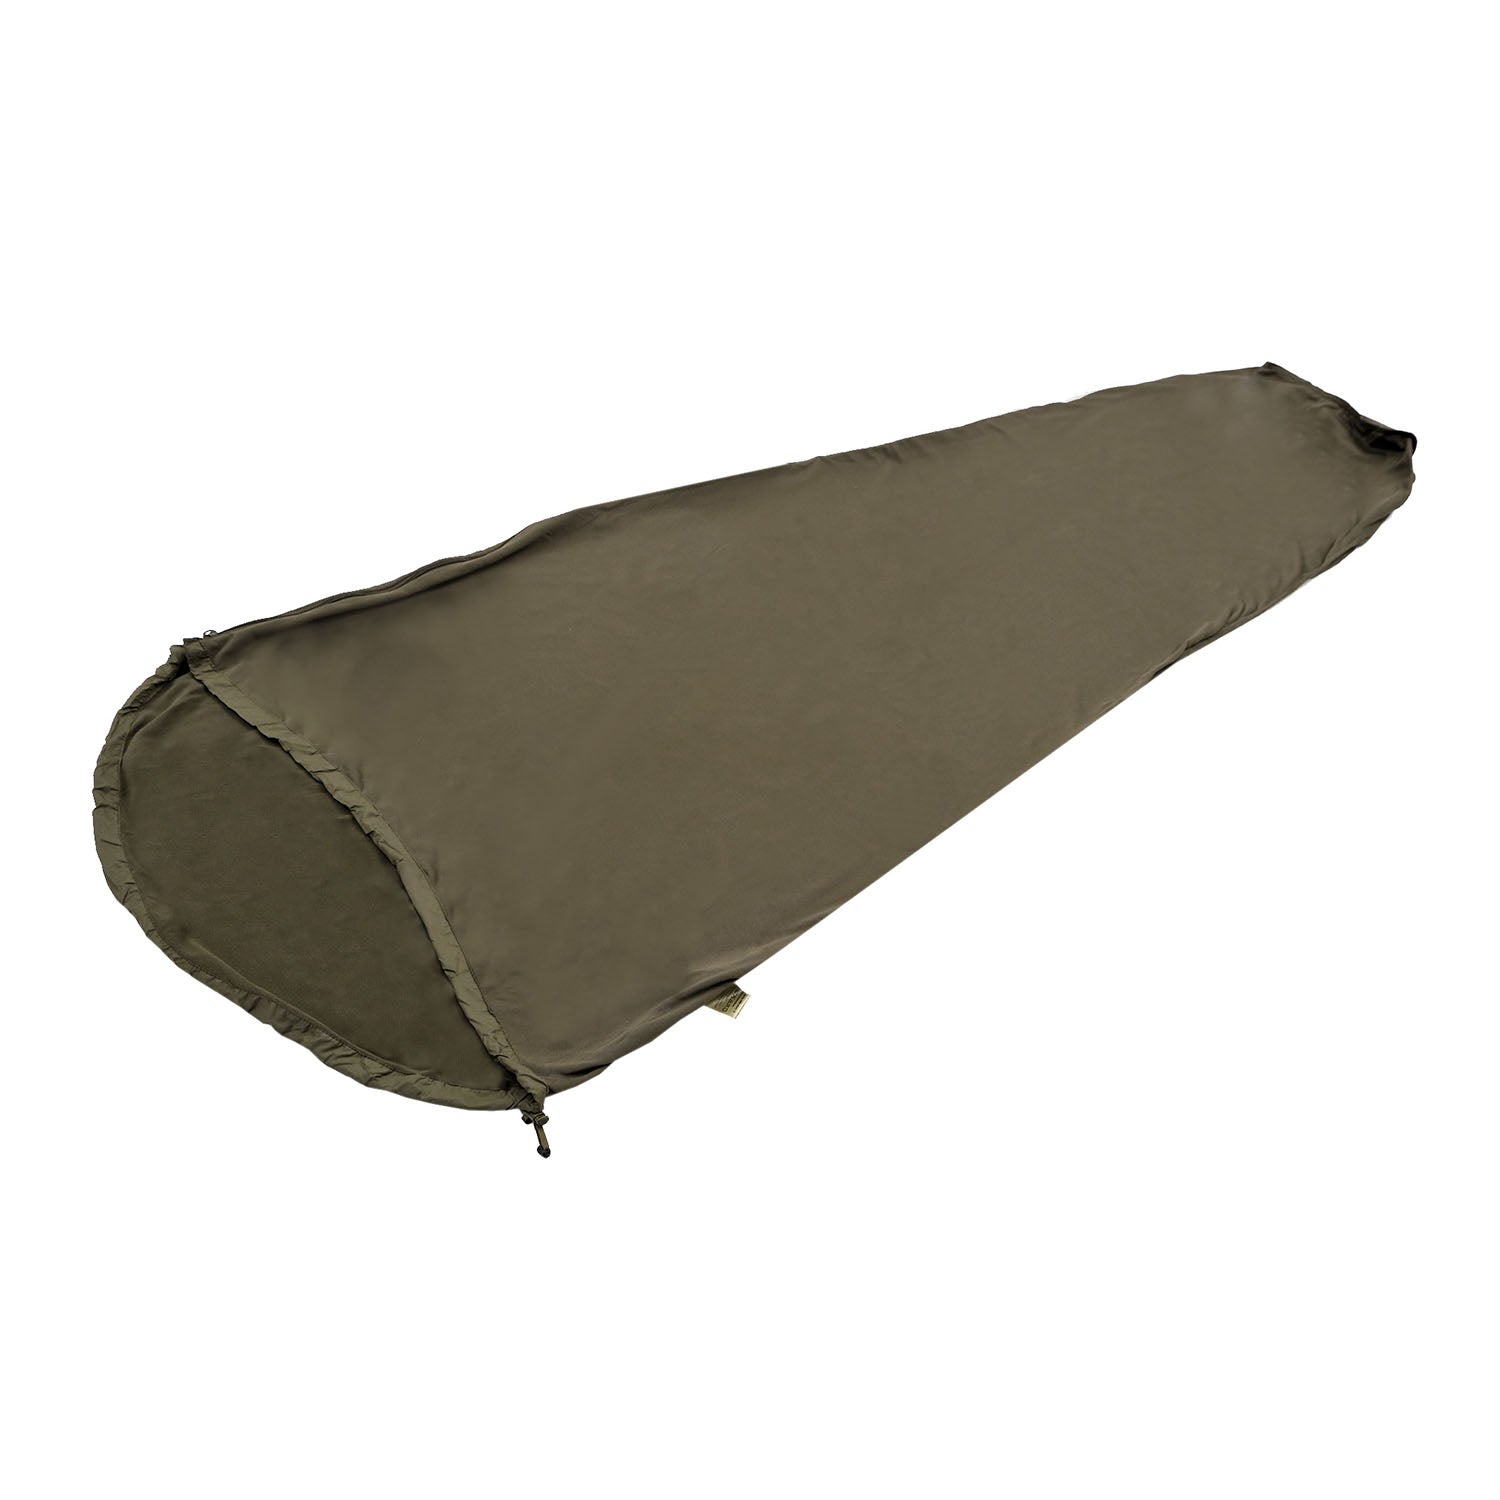 Carinthia Grizzly, olive